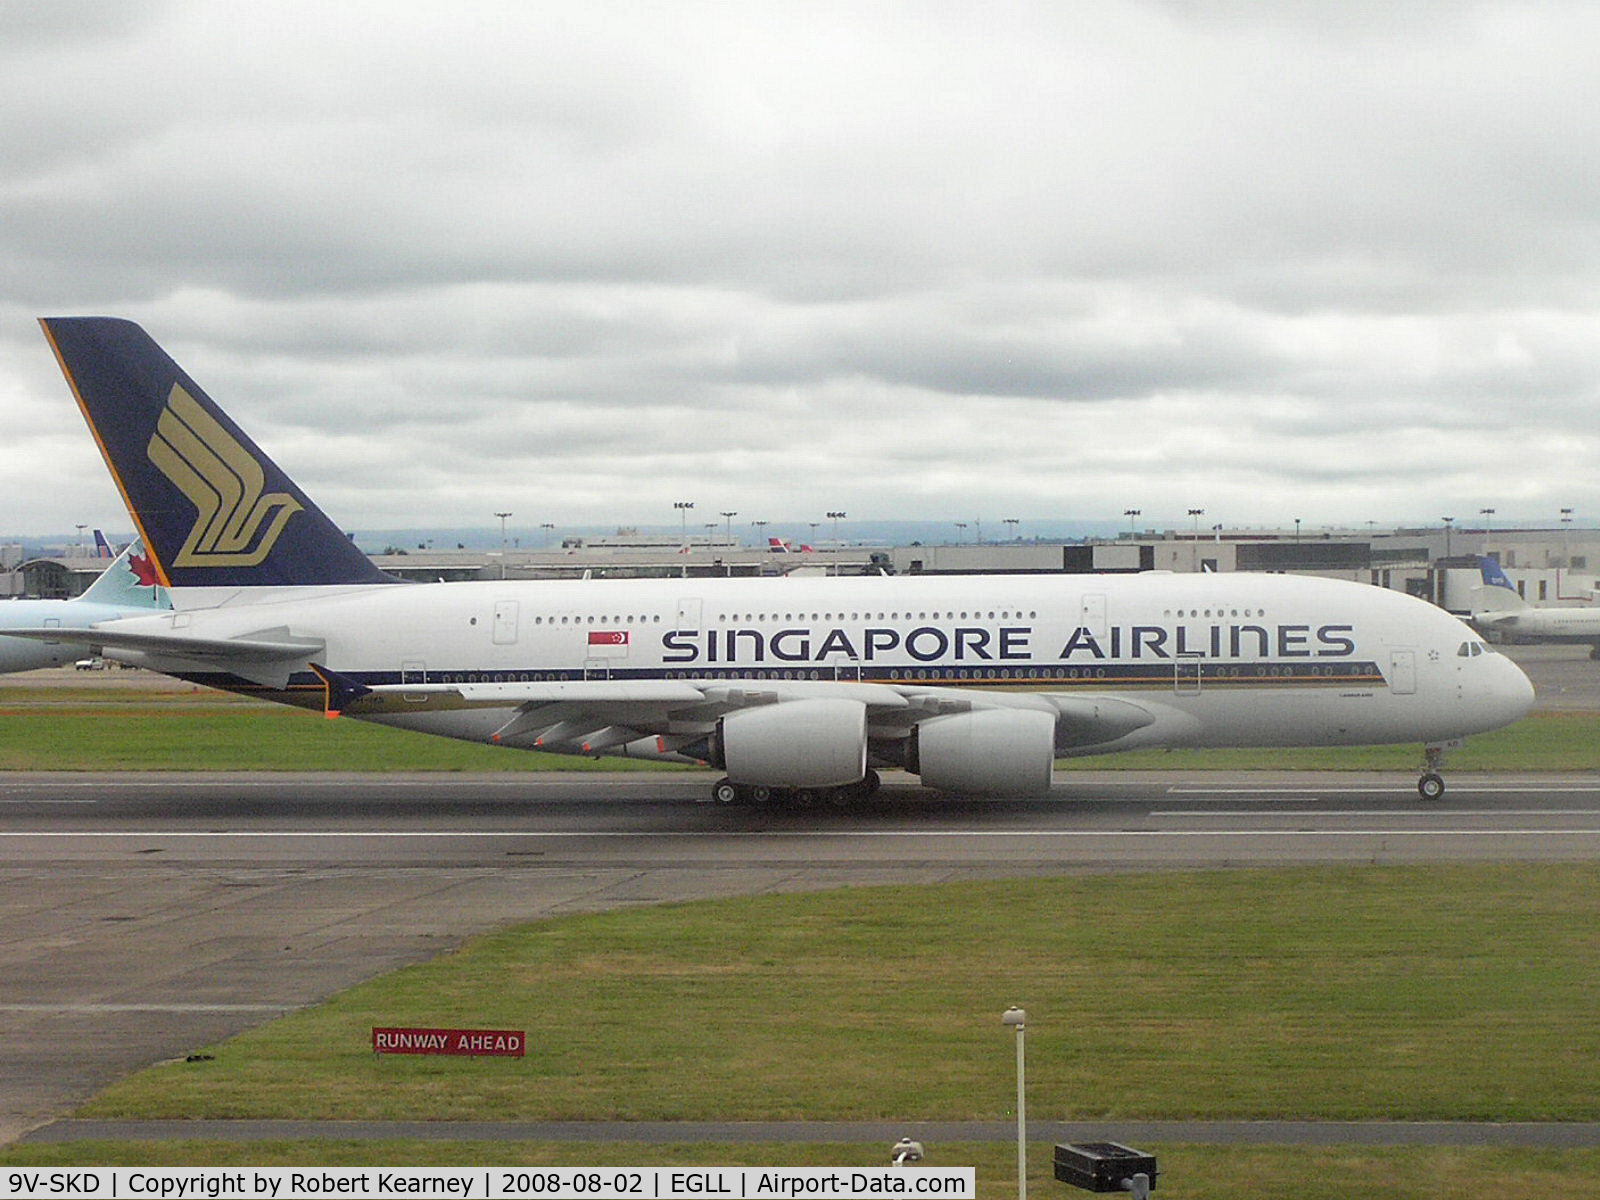 9V-SKD, 2008 Airbus A380-841 C/N 008, Singapore A380 rolling